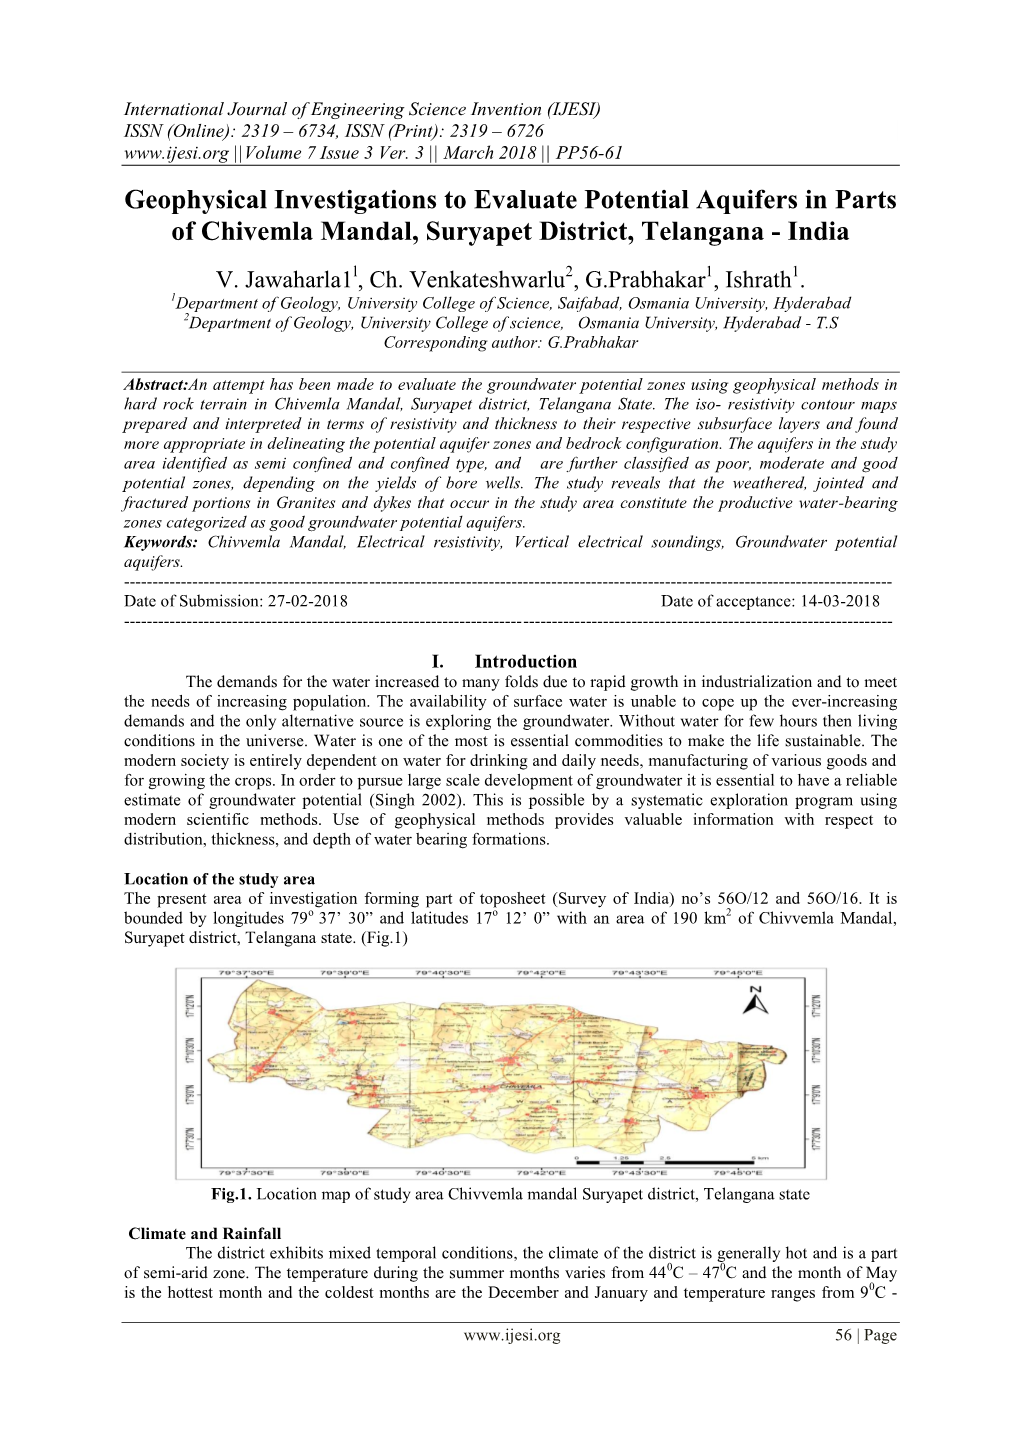 Geophysical Investigations to Evaluate Potential Aquifers in Parts of Chivemla Mandal, Suryapet District, Telangana - India